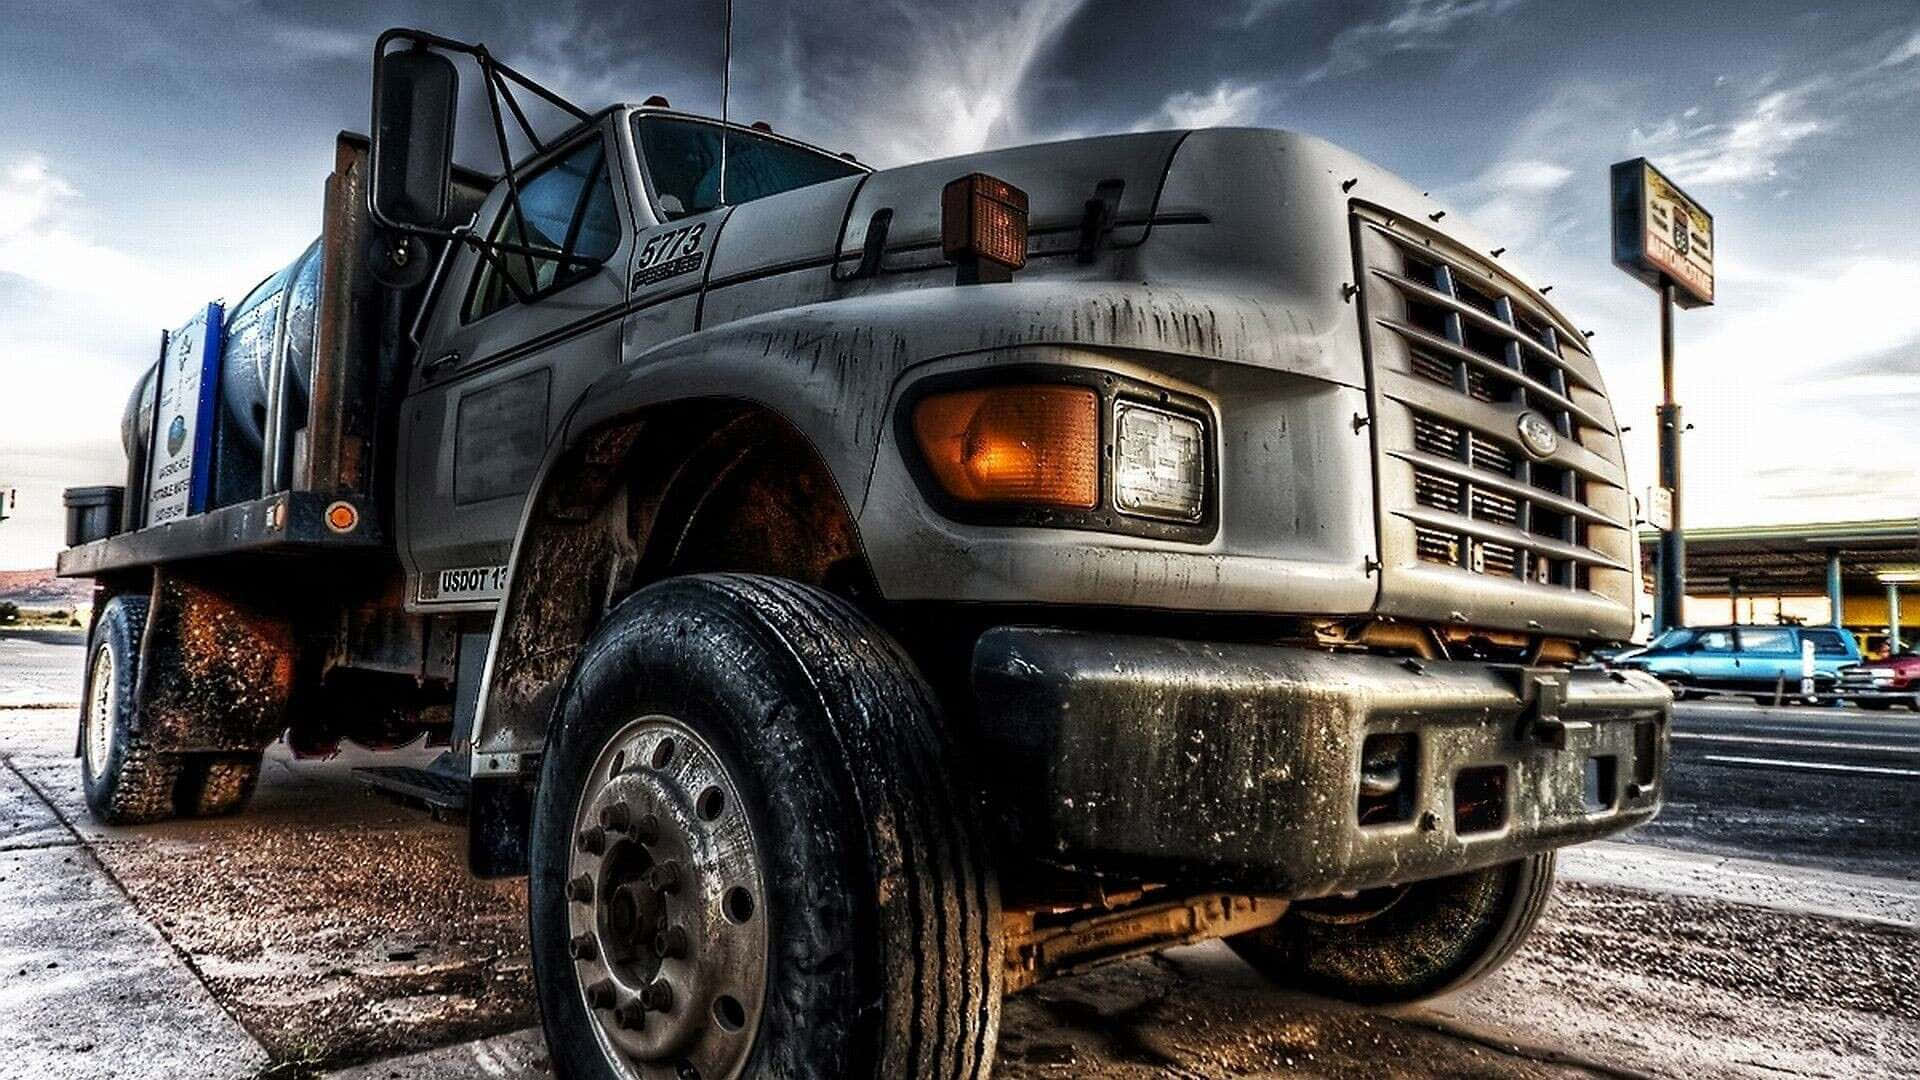 Rugged Ford Truck Dramatic Sky Wallpaper